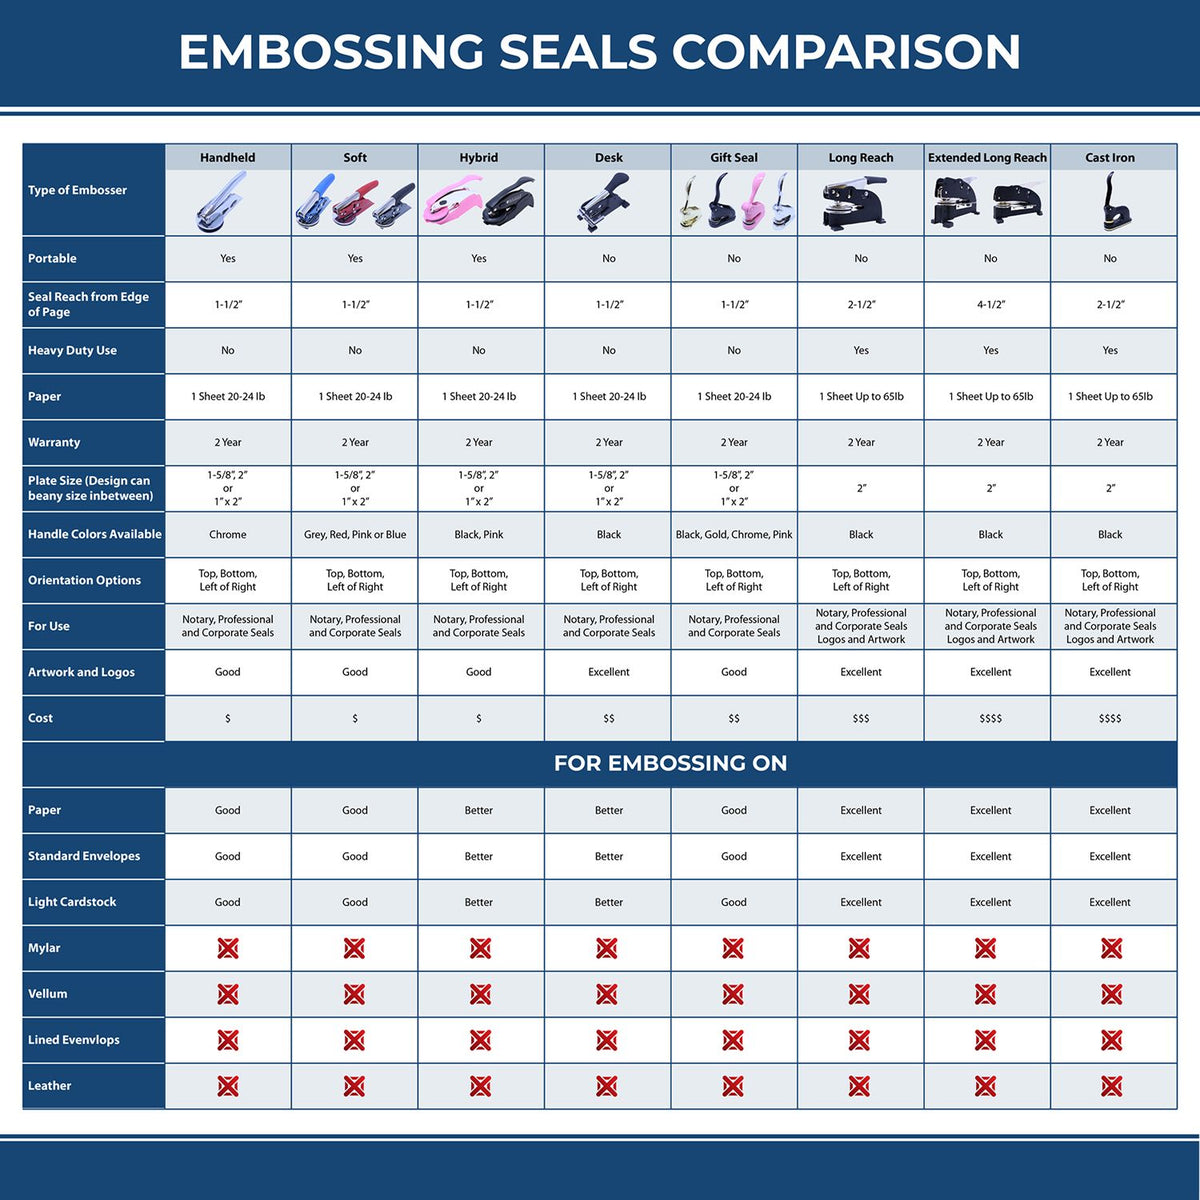 A comparison chart for the different types of mount models available for the Long Reach California PE Seal.